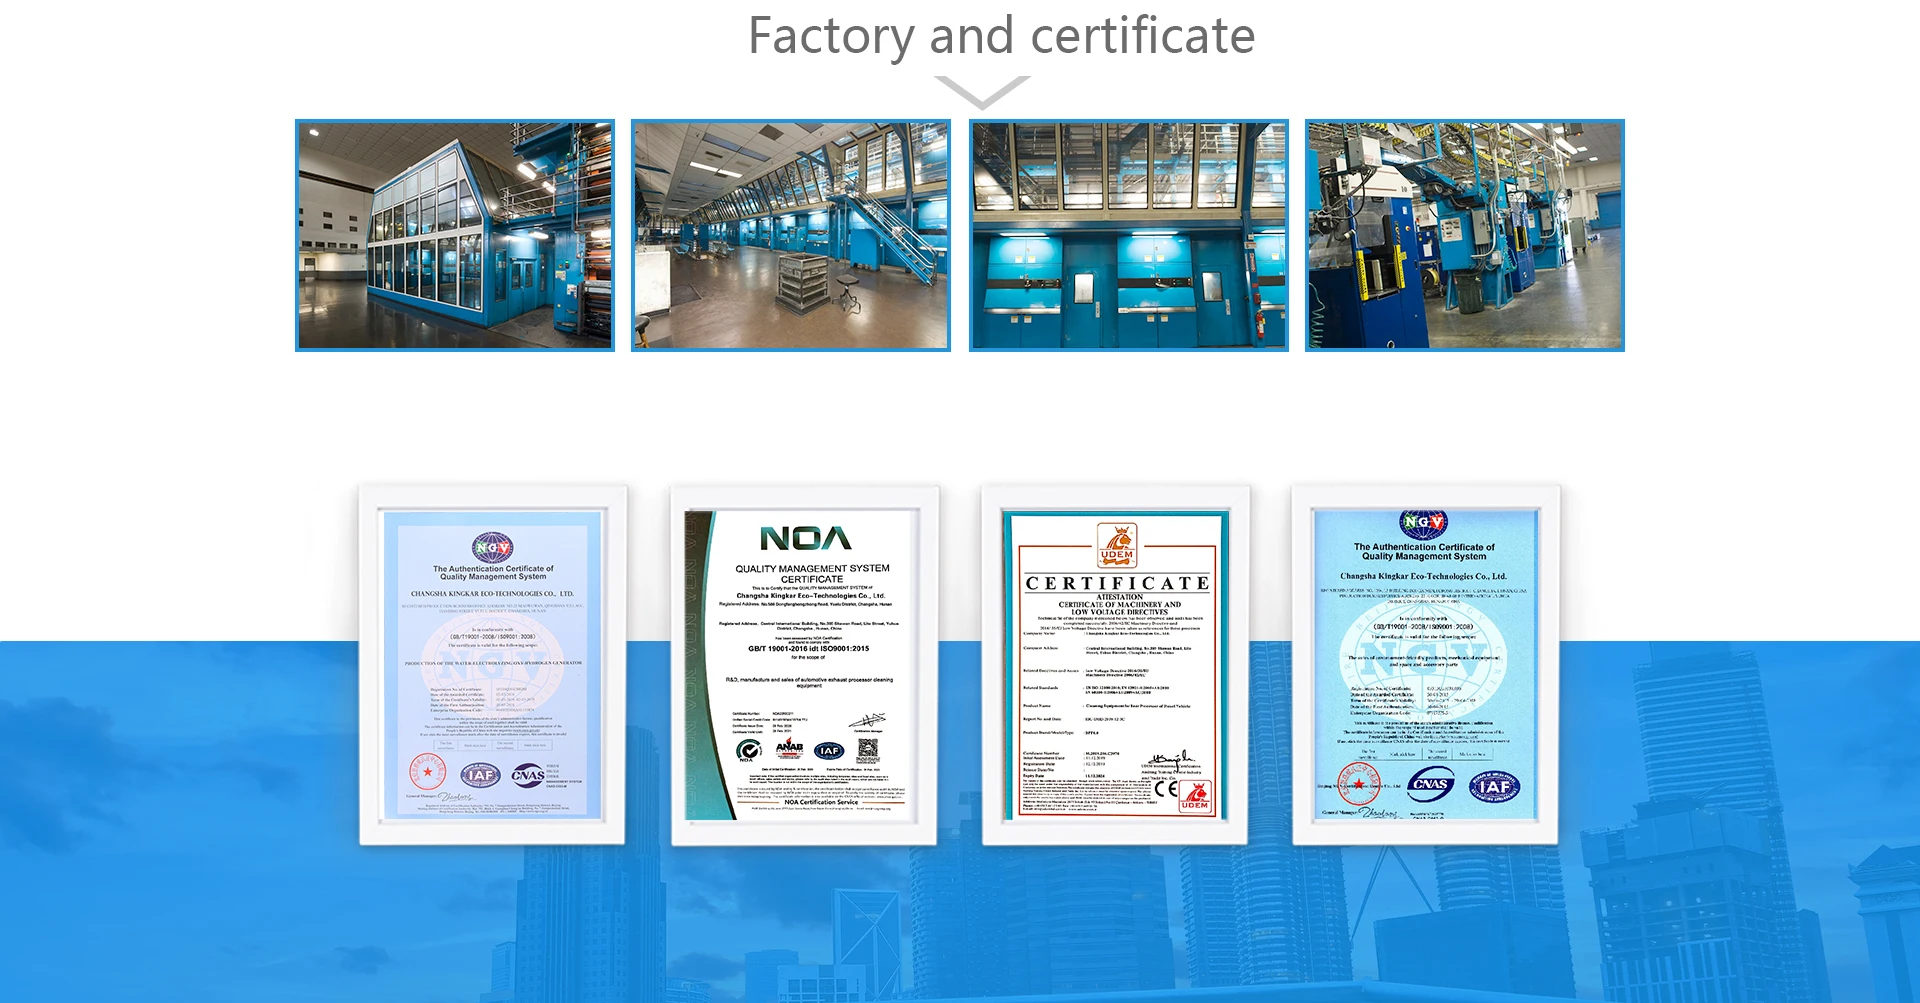 1 factory and certificate